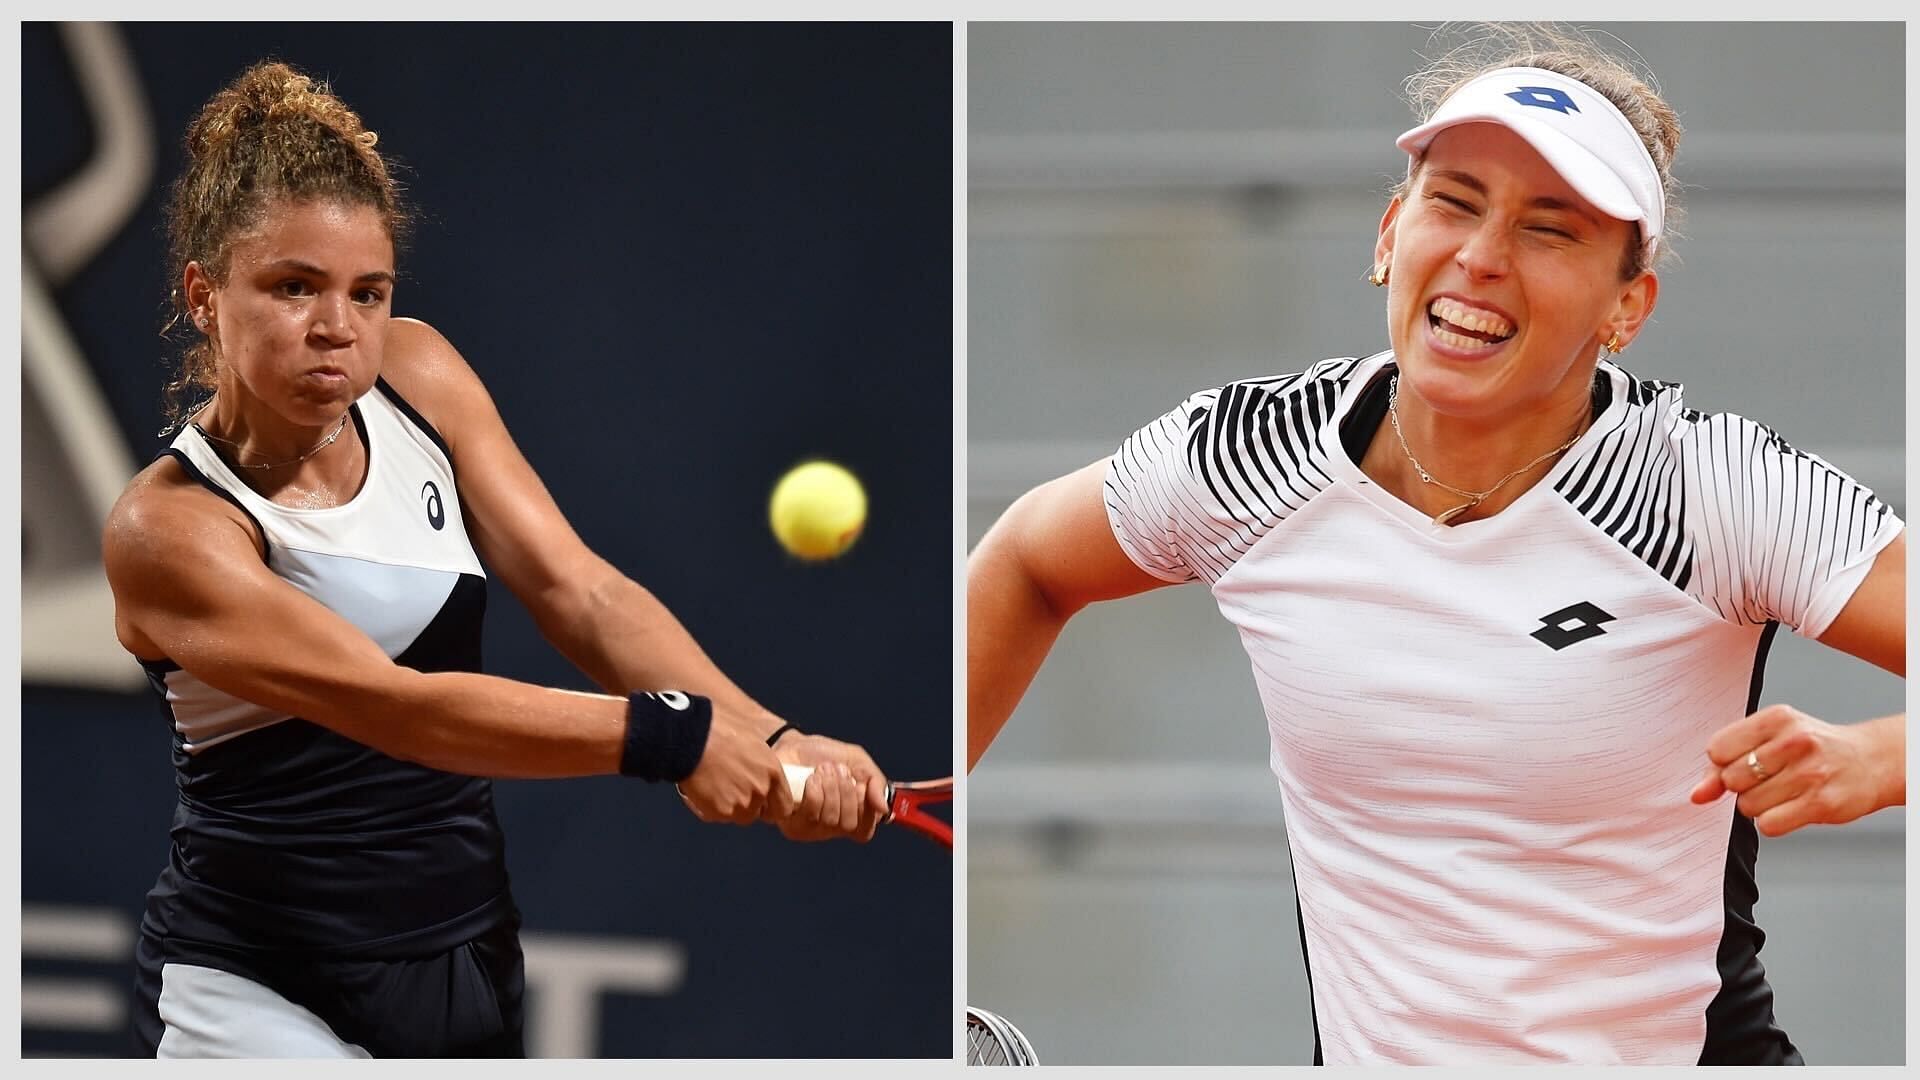 Jasmin Open 2023 final: Jasmine Paolini vs Elise Mertens preview, head-to-head, prediction, odds, and pick